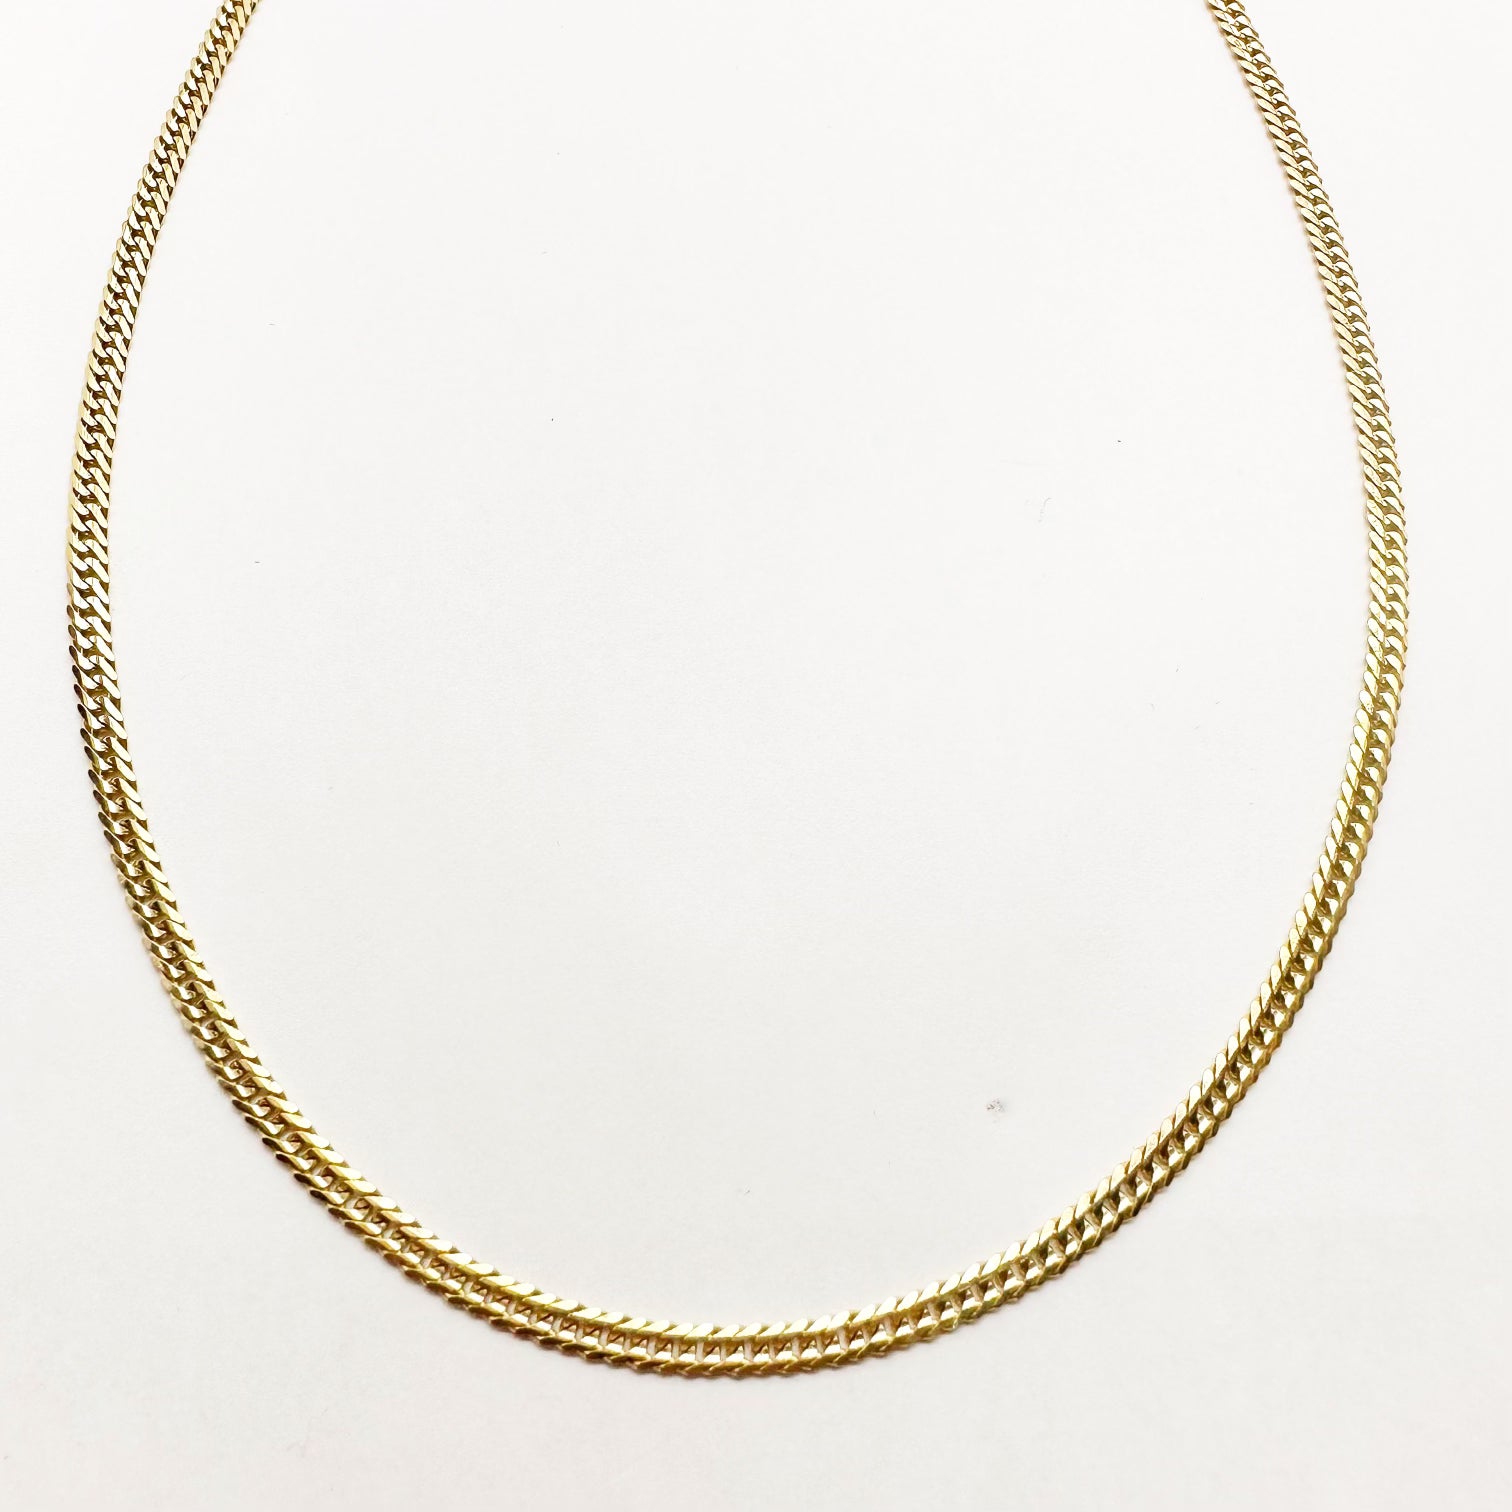 GOLD DOUBLE CURB CHAIN